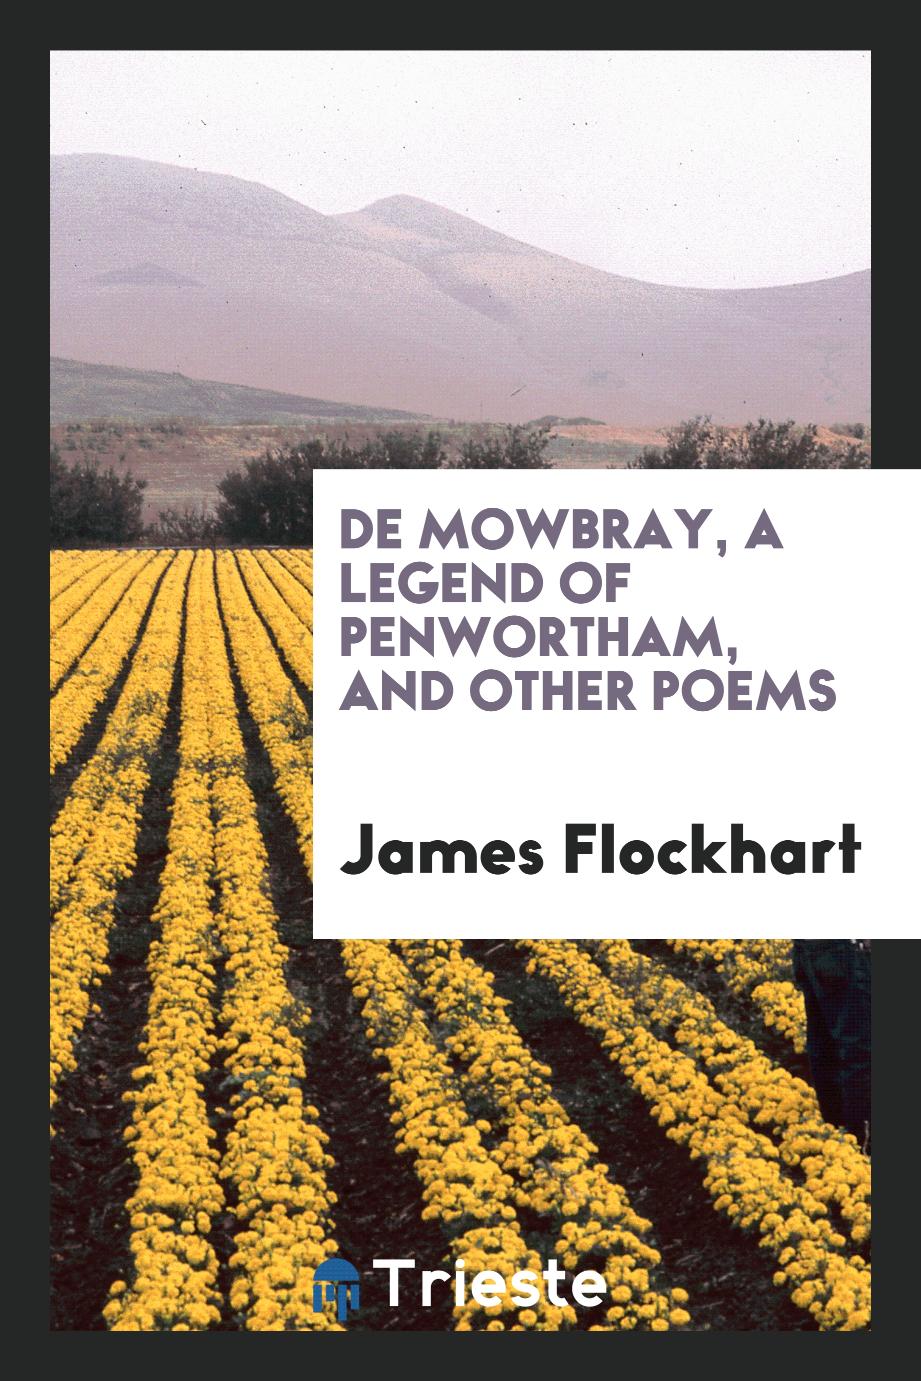 De Mowbray, a legend of Penwortham, and other poems